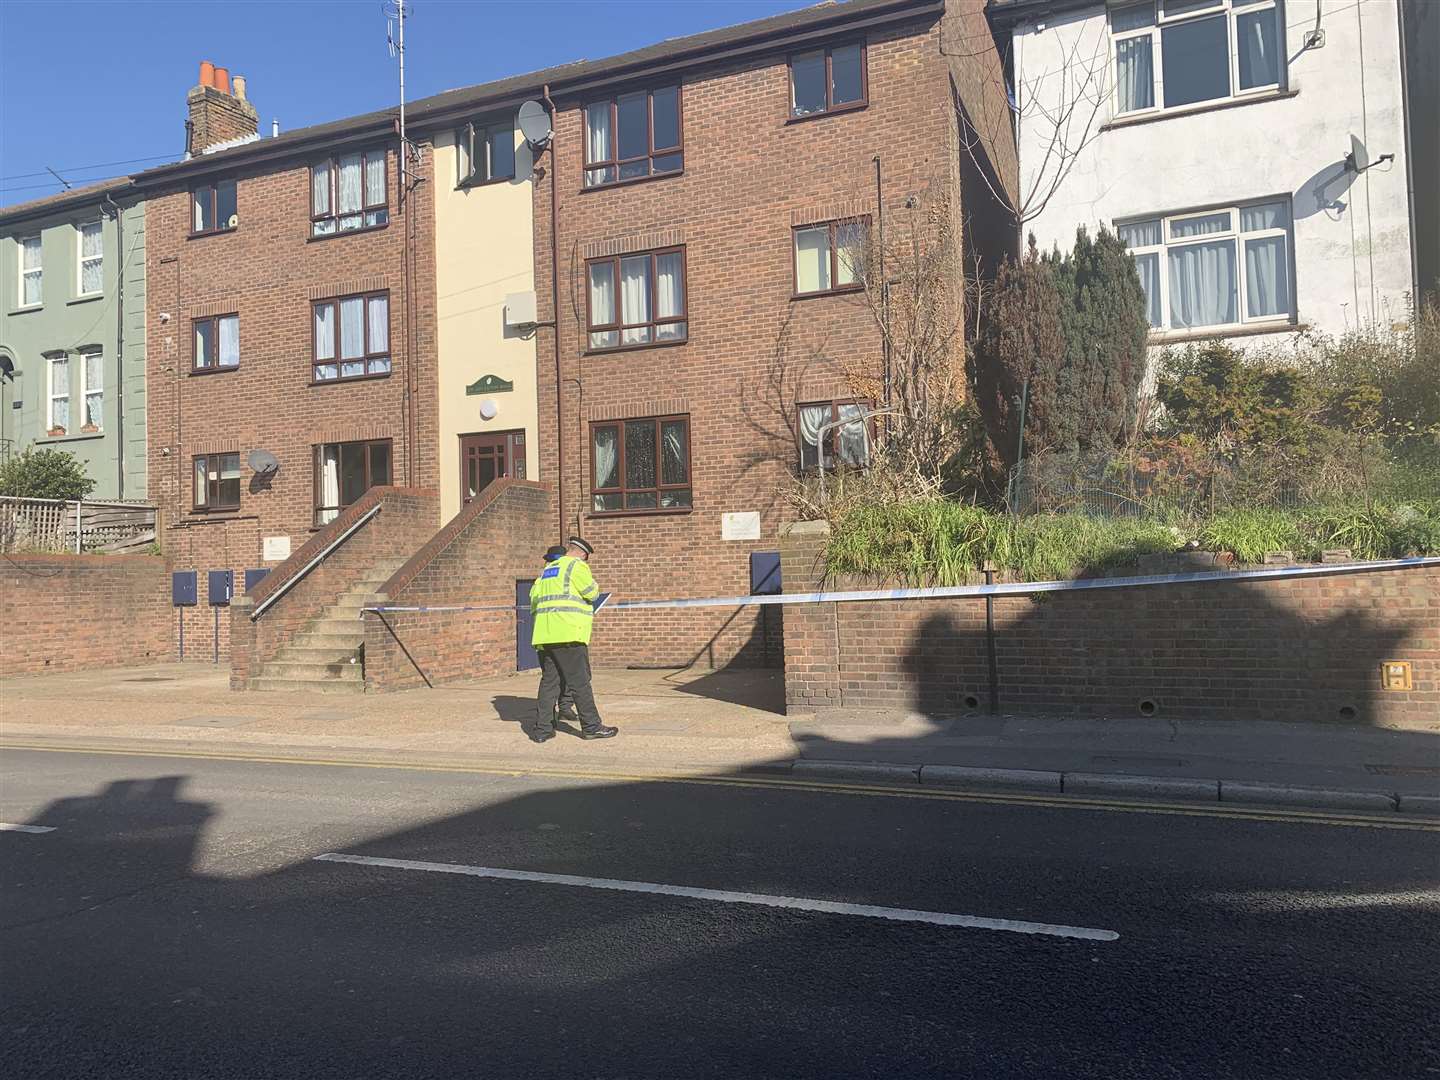 Police have cordoned off a property in Luton Road (7433207)